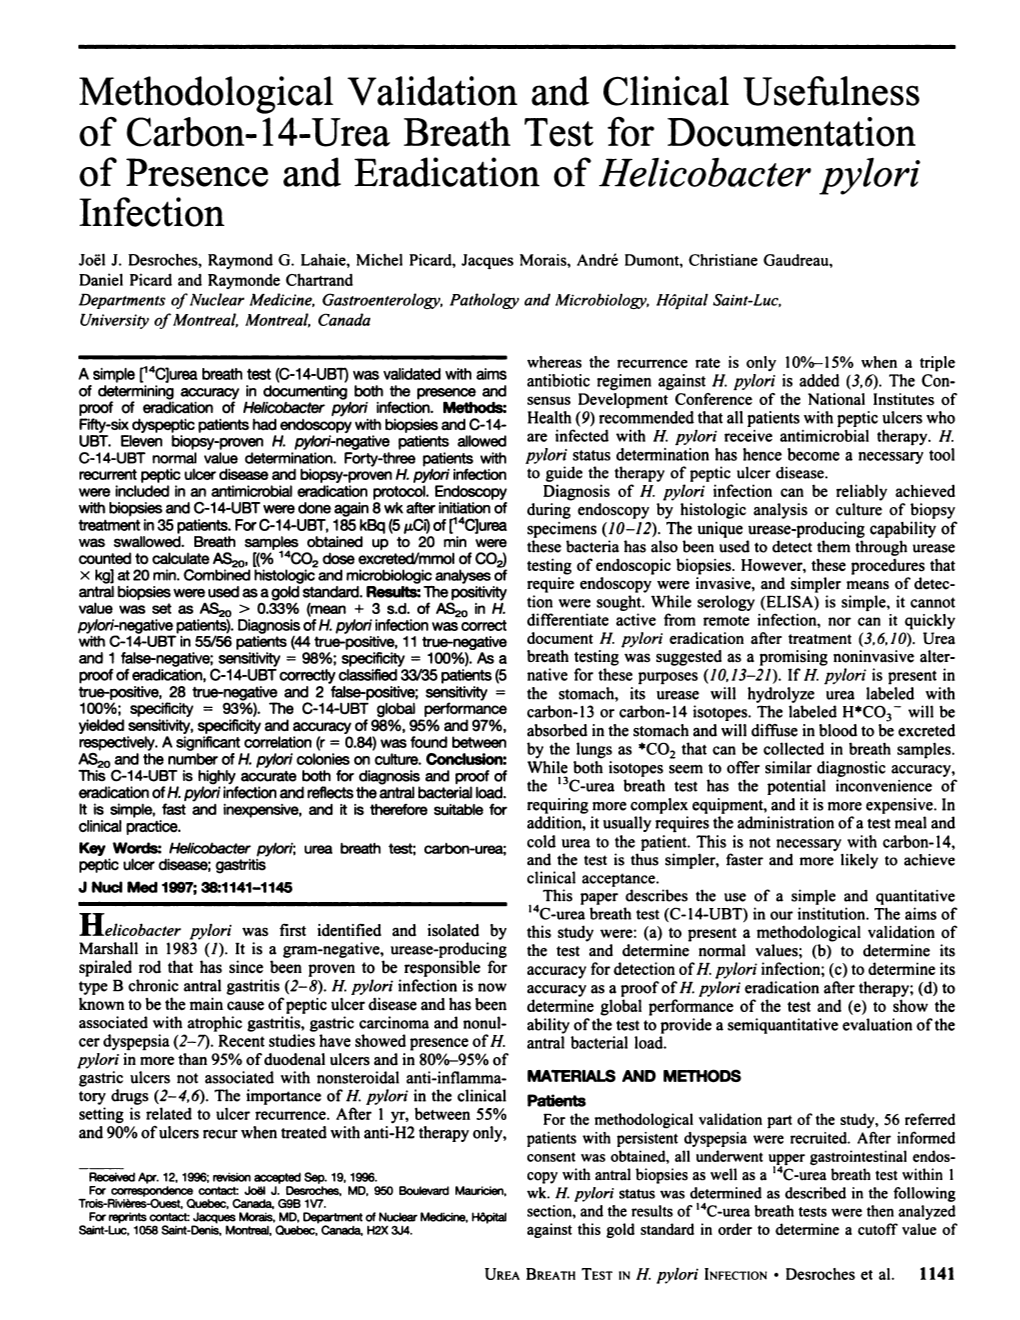 Methodological Validation and Clinical Usefulness of Carbon-14-Urea Breath Test for Documentation of Presence and Eradication of Helicobacter Pylori Infection